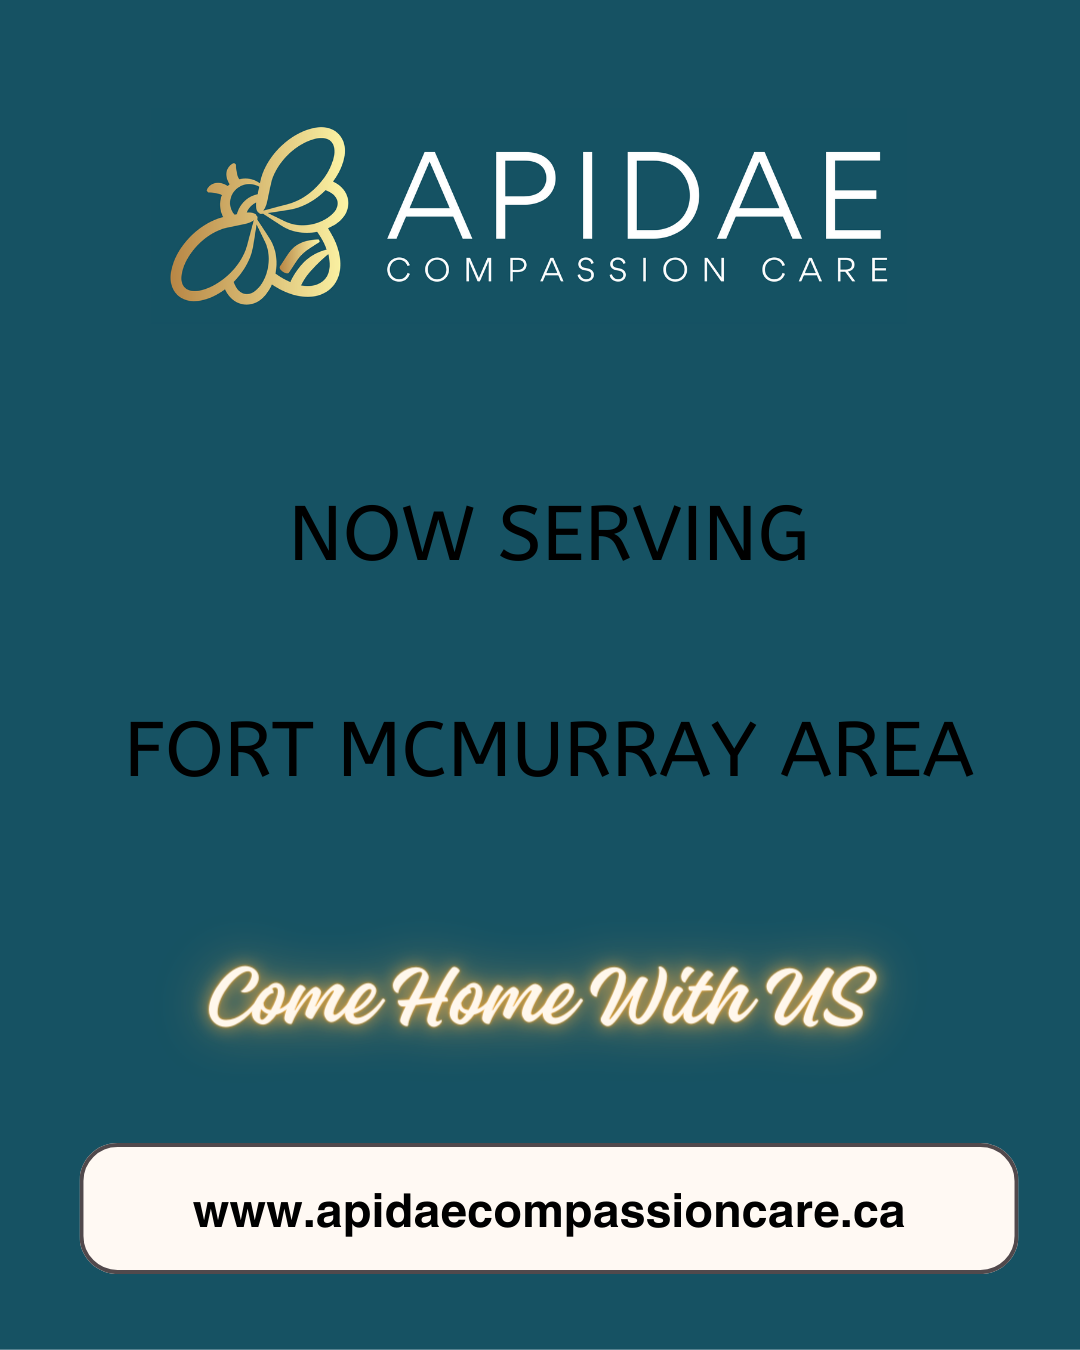 Now serving Fort McMurray